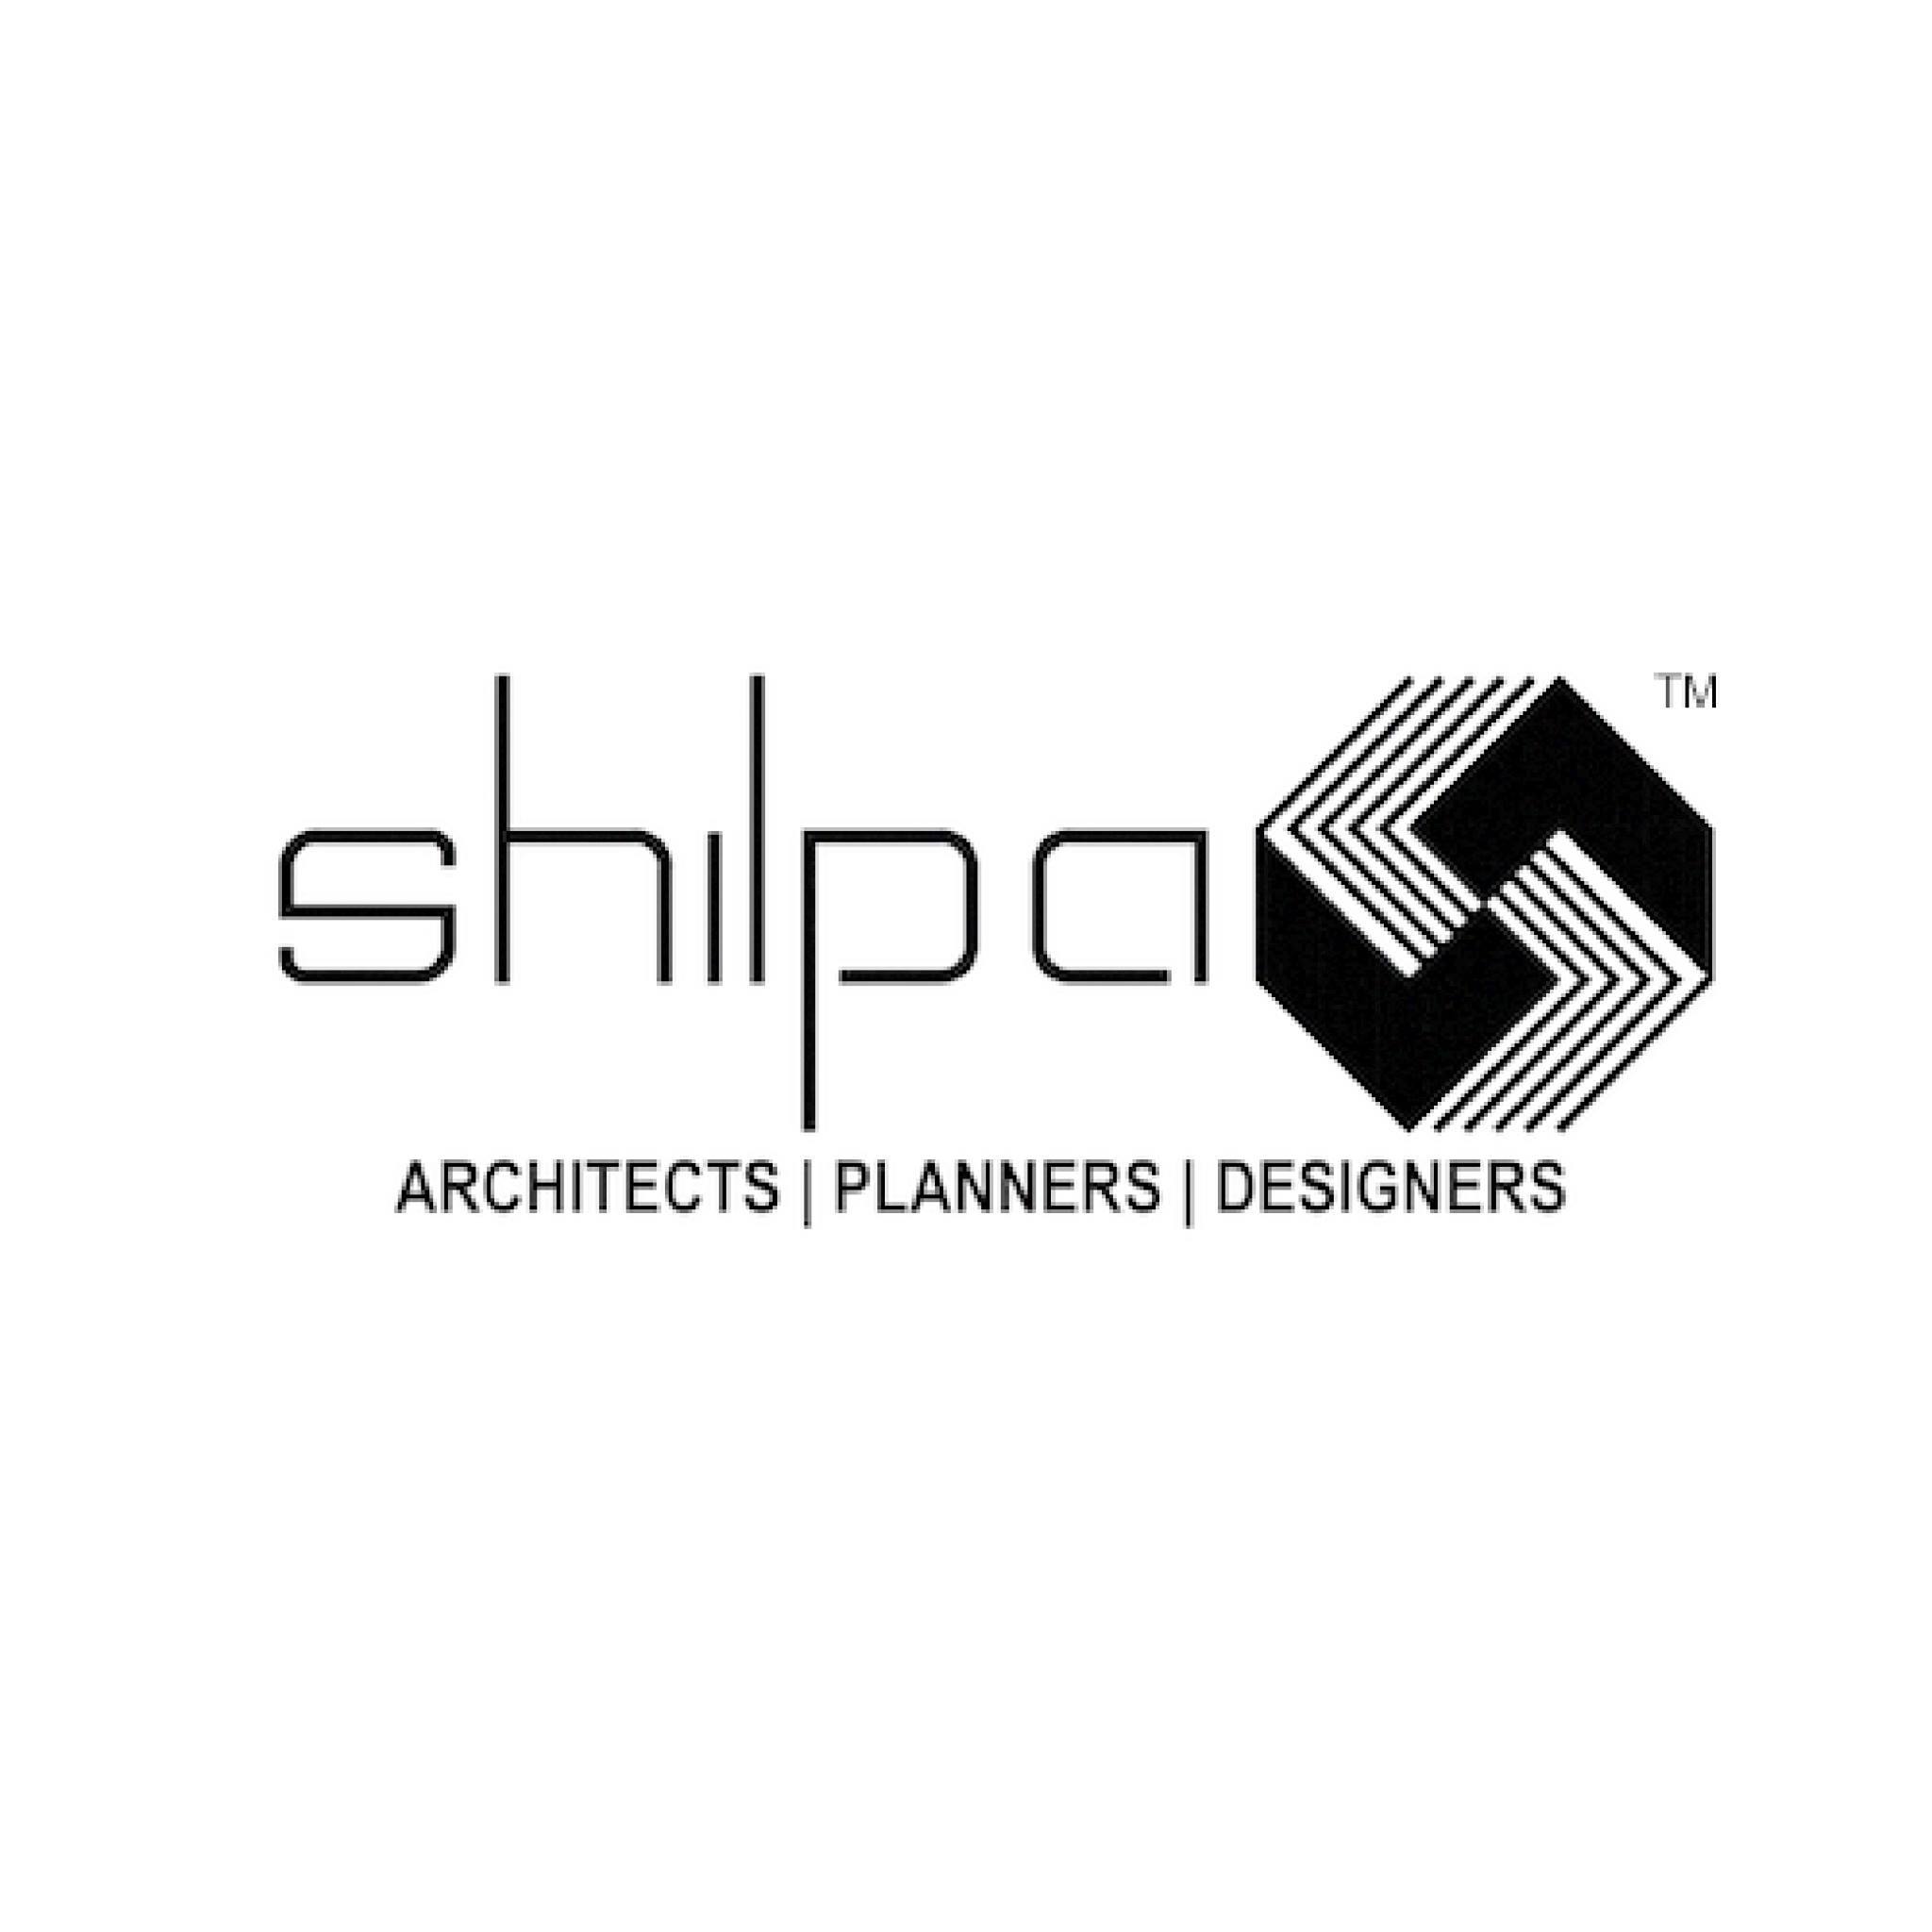 Shilpa Architects Planners Designers|Accounting Services|Professional Services